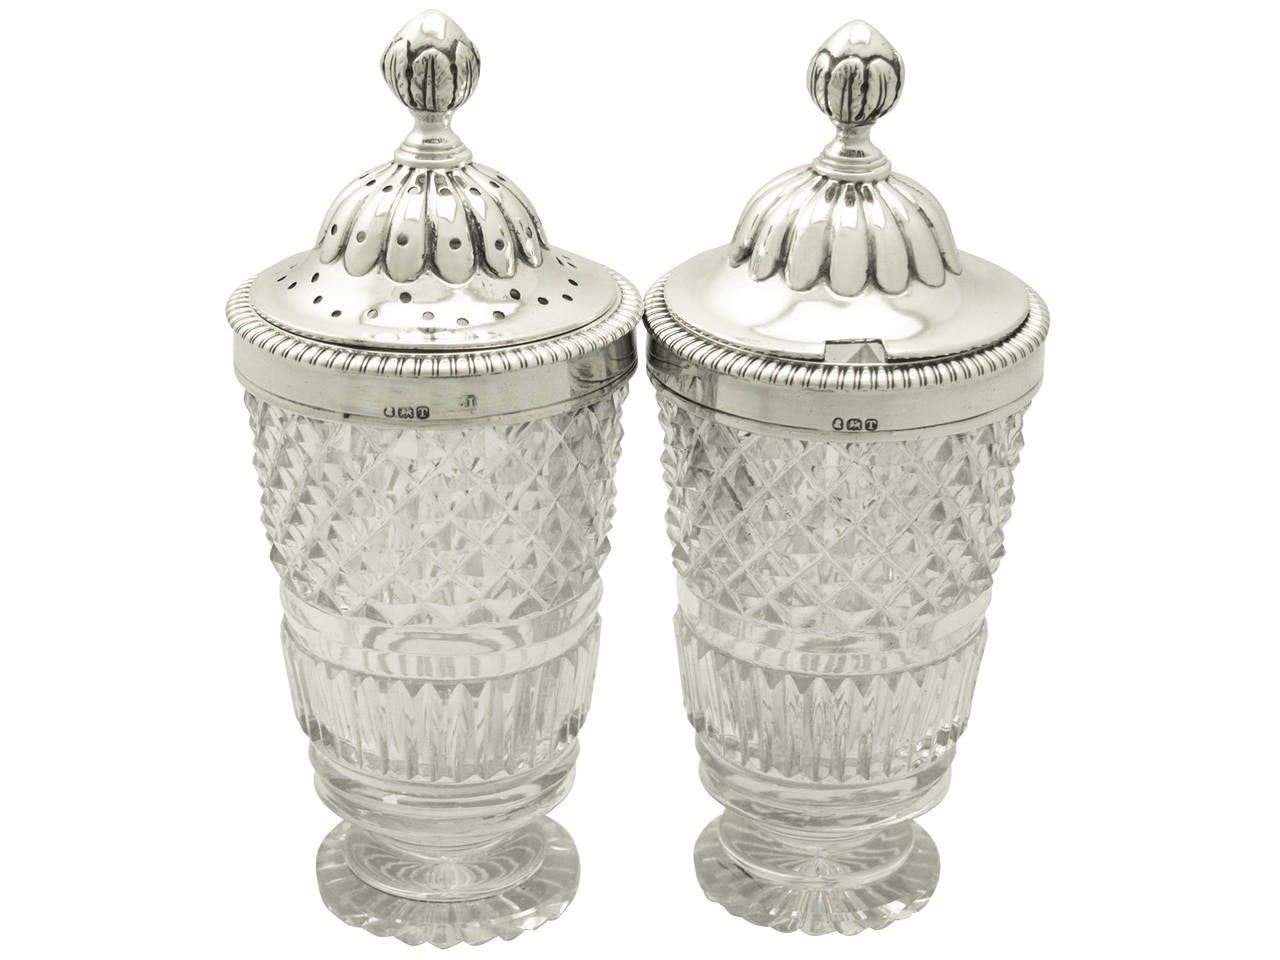 English 19th Century Antique George III Sterling Silver and Cut Glass Cruet Set